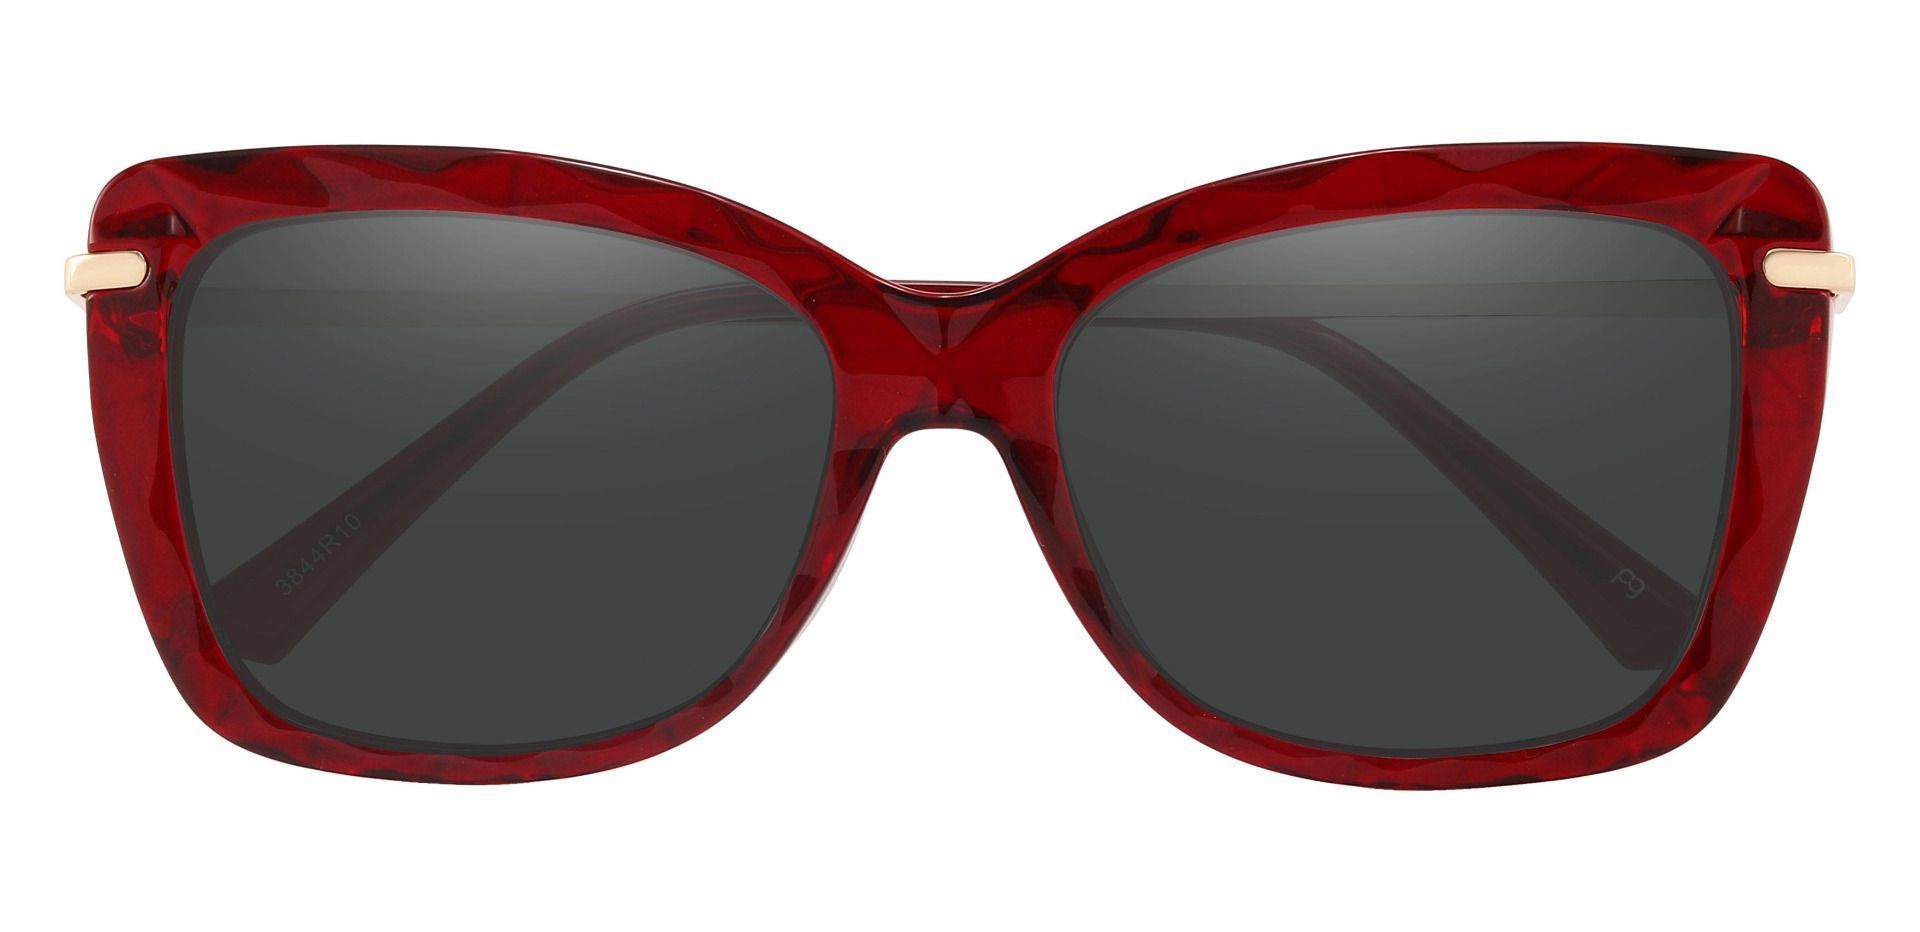 Shoshanna Rectangle Reading Sunglasses - Red Frame With Gray Lenses